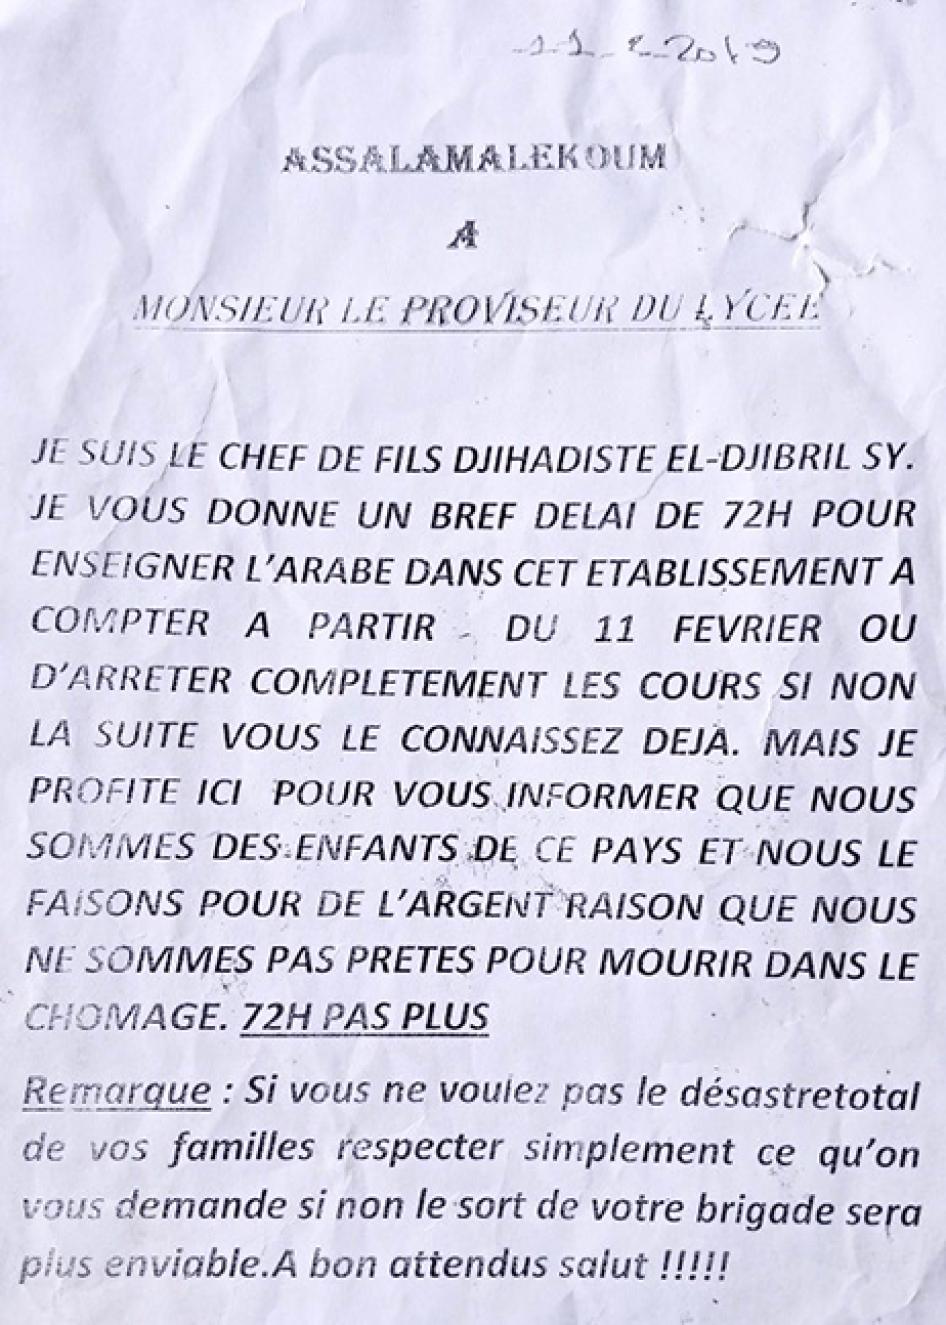 A typed letter in French